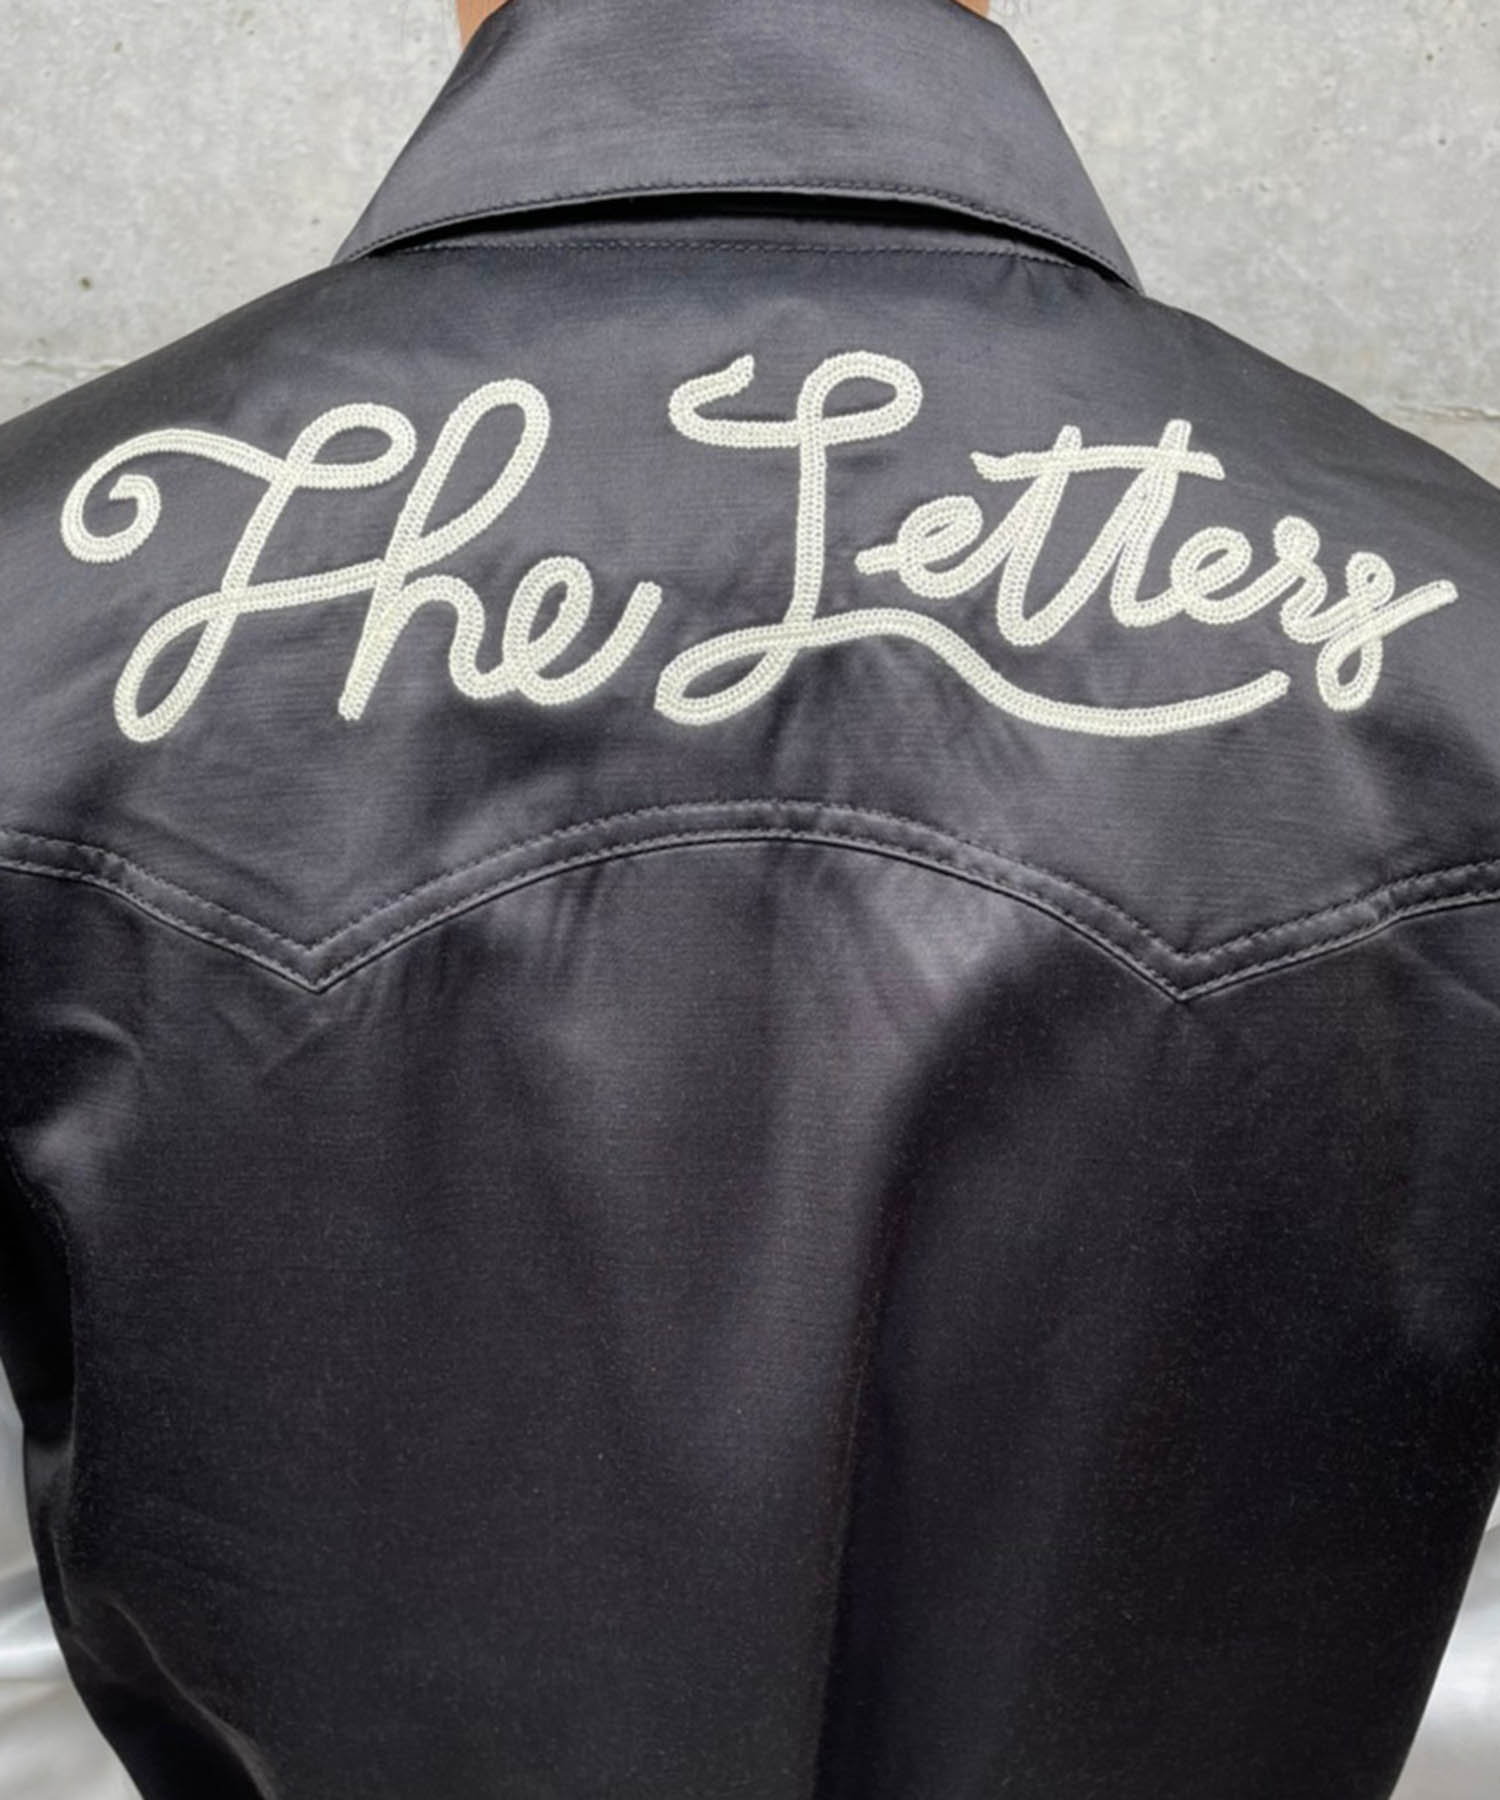 WESTERN SPORTS JACKET The Letters